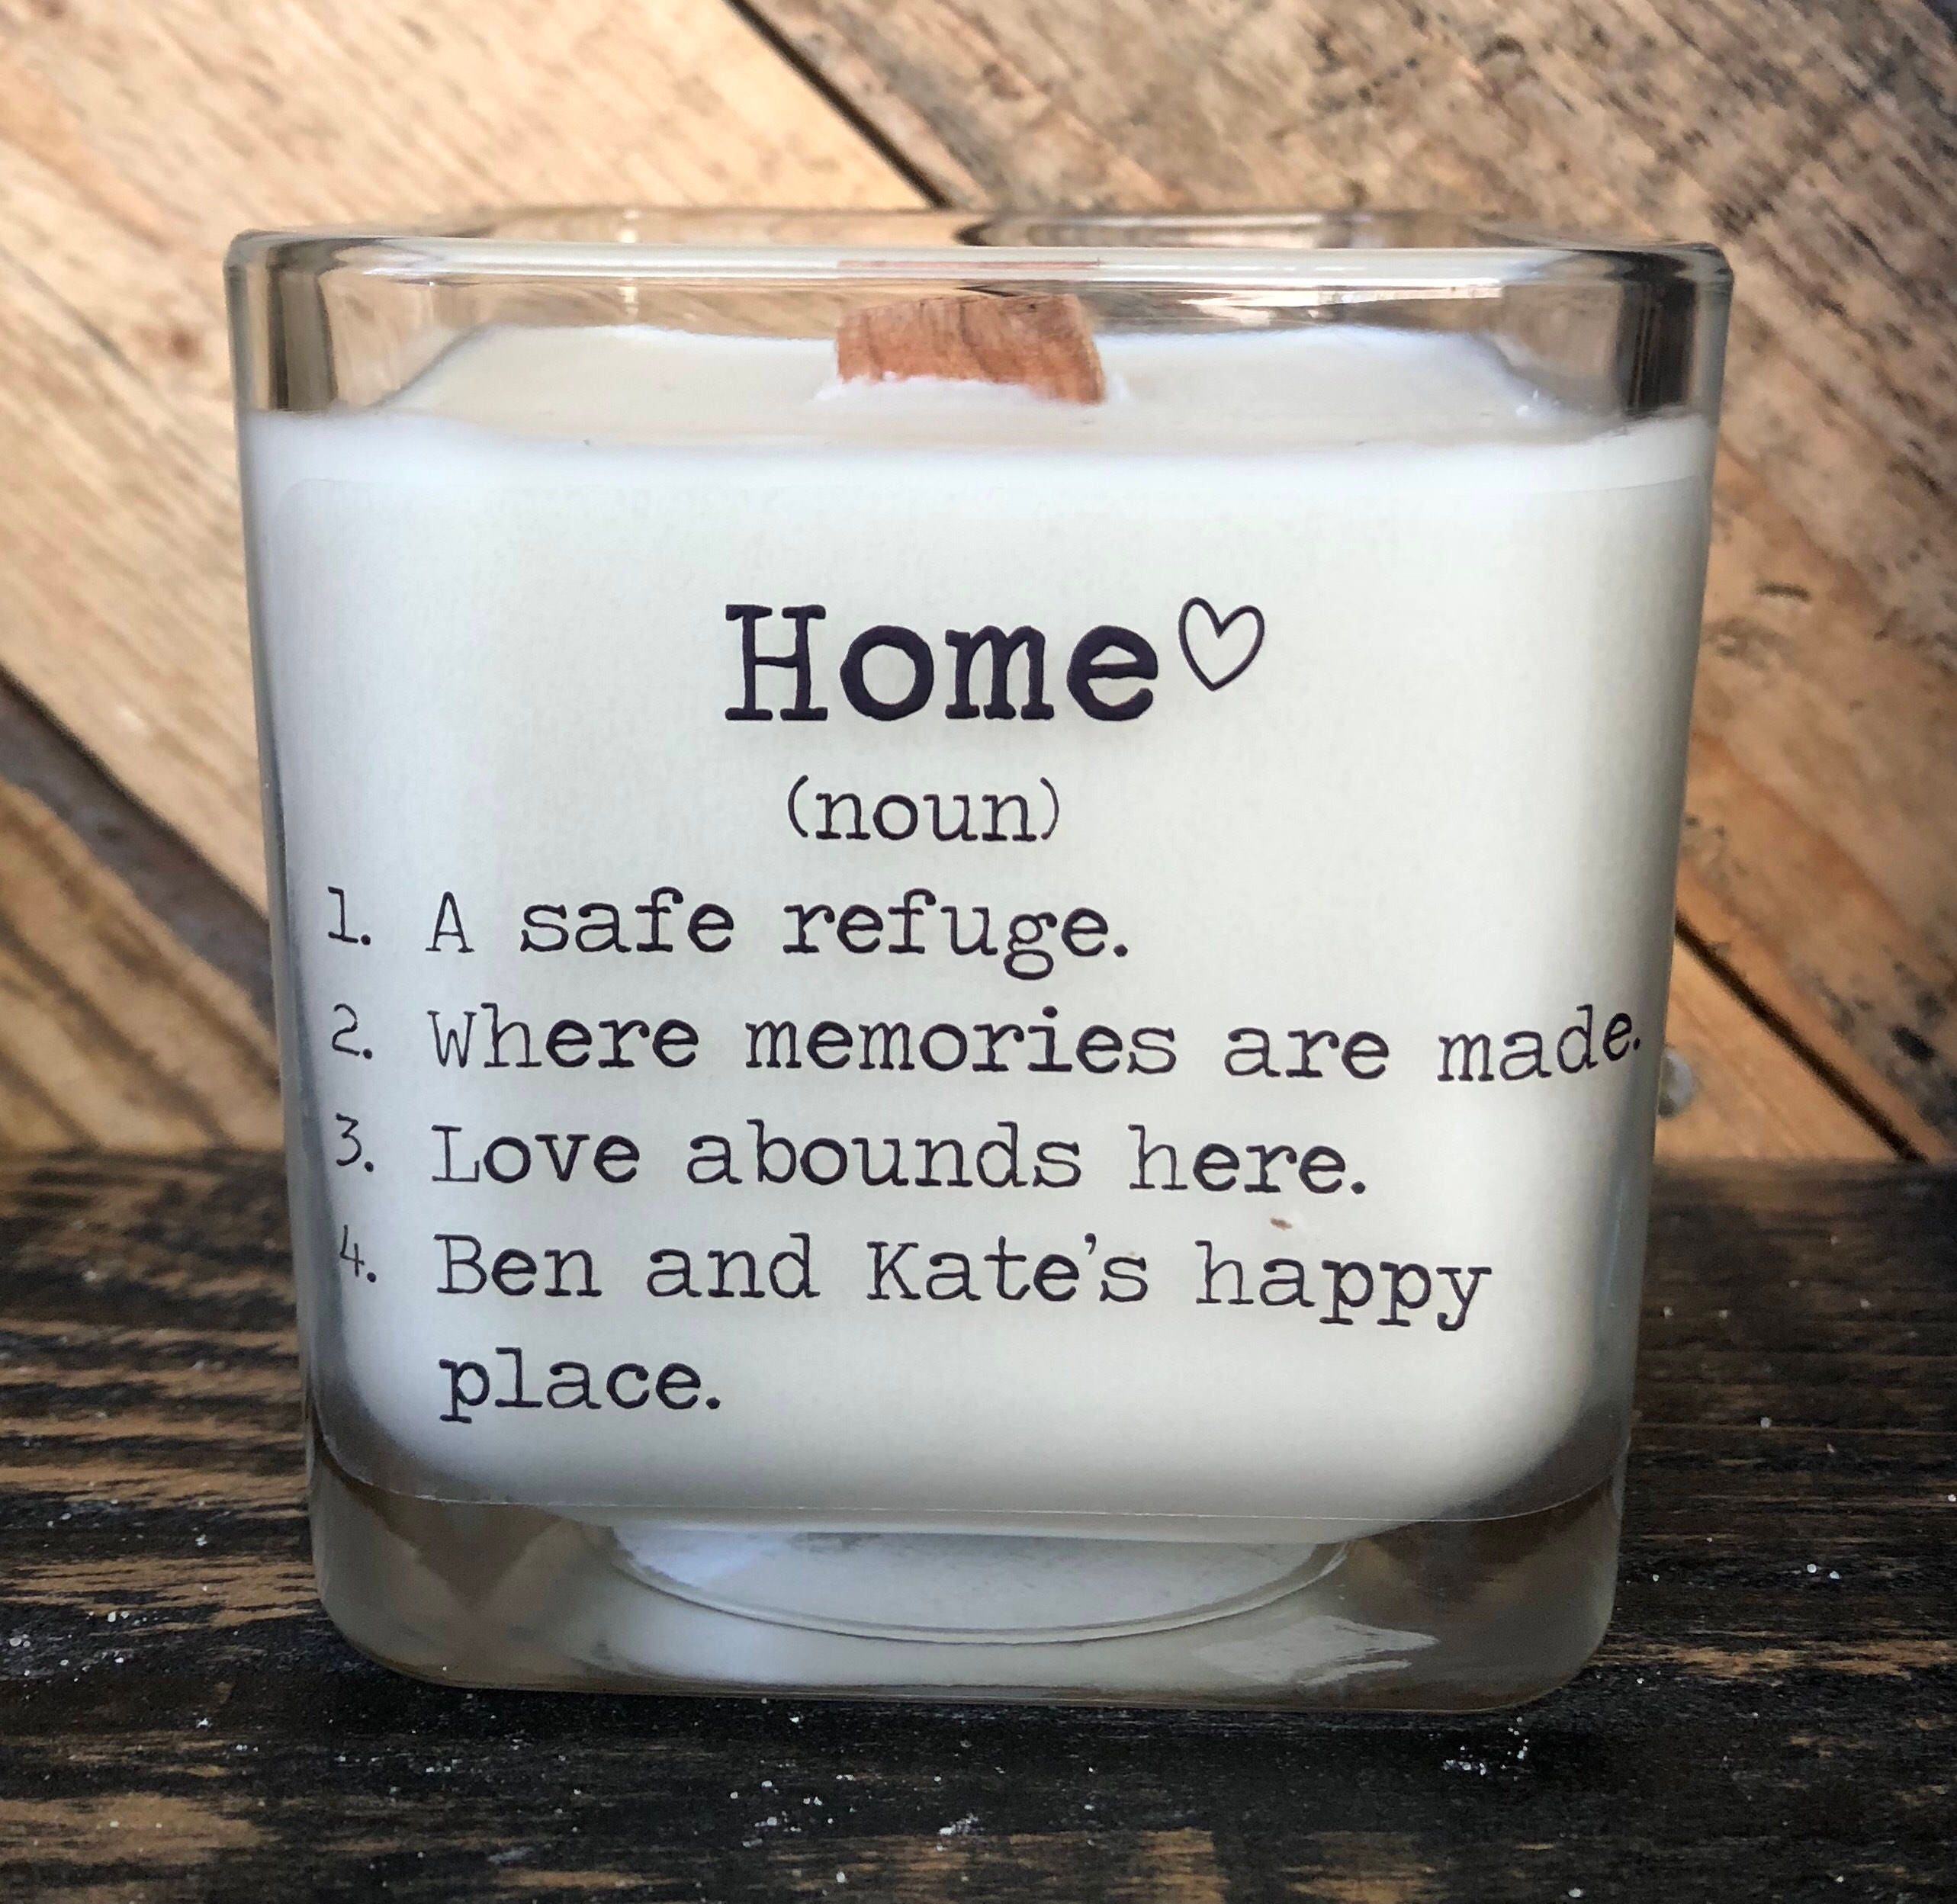 The Best Housewarming Gifts for New Homeowners - Personalized by Kate |  Best housewarming gifts, New homeowner gift, House warming gifts